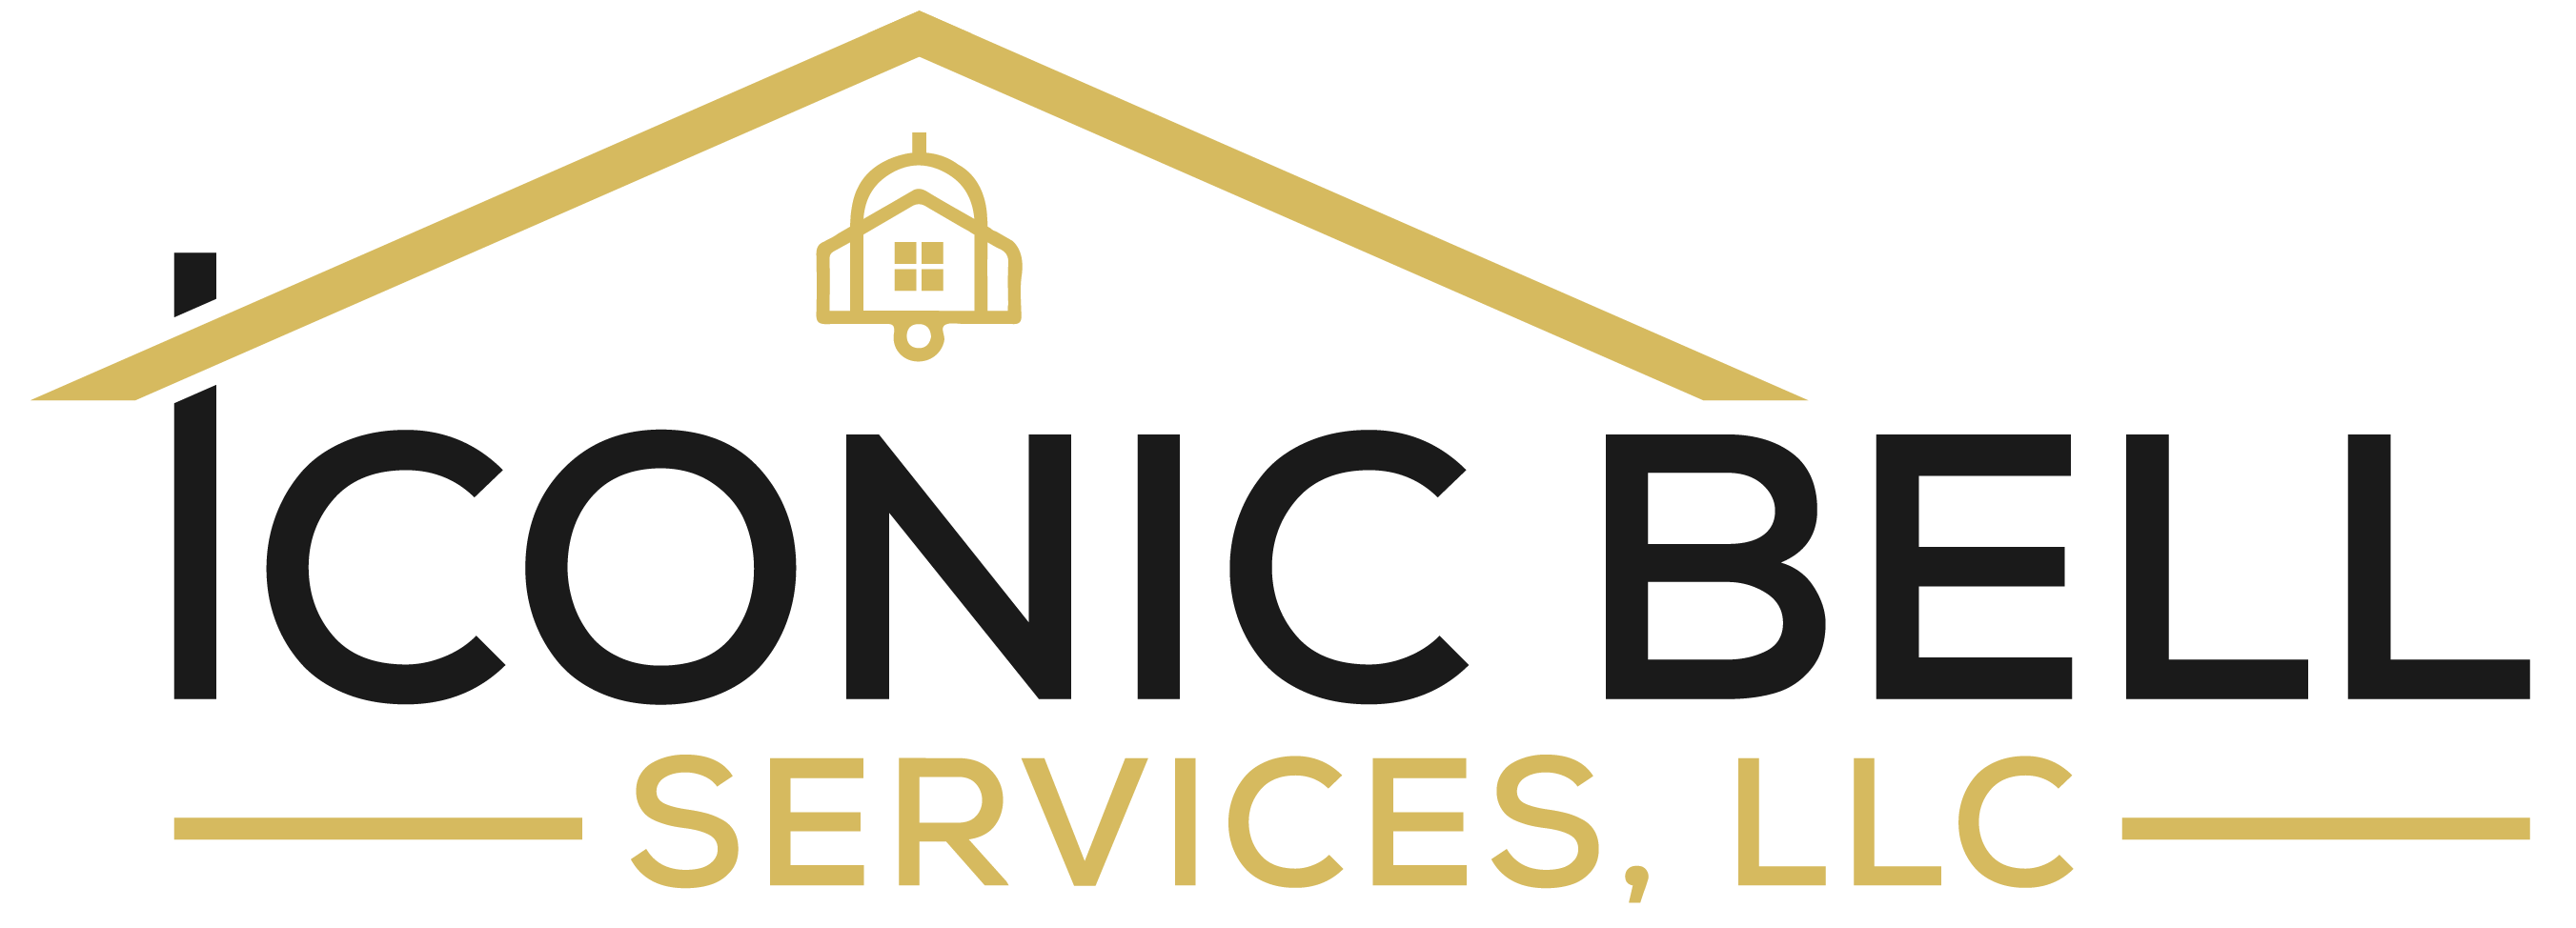 Iconic Bell Services